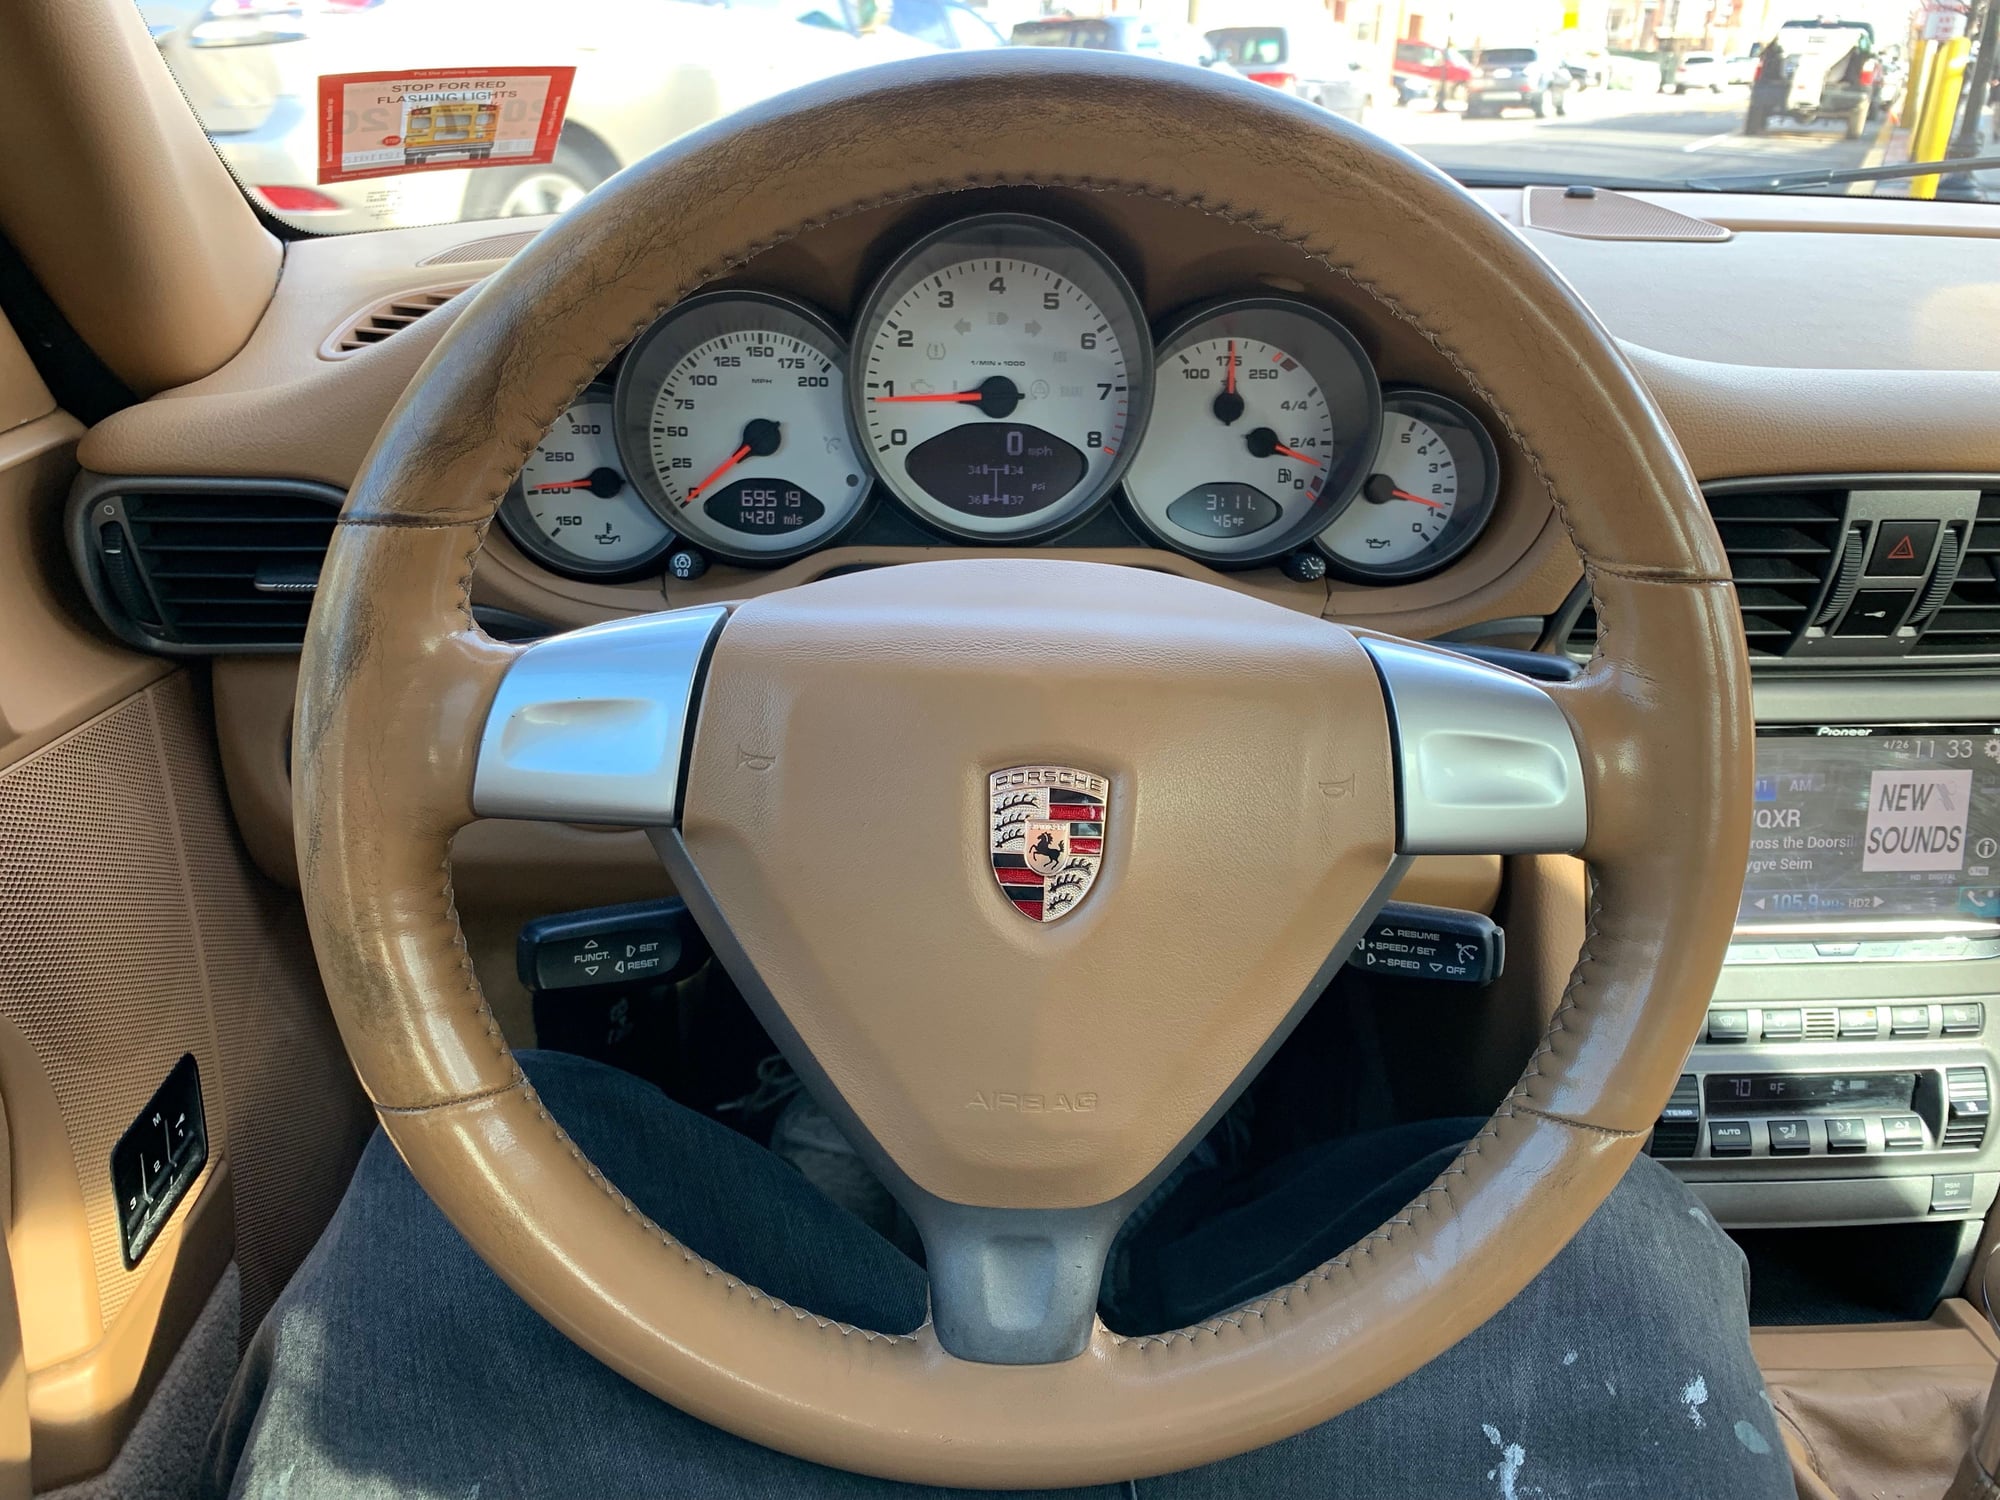 2008 Porsche 911 - 2008 911 Carrera Manual Macadamia Brown 69k miles - Used - VIN WP0AA29928S710516 - 69,000 Miles - 6 cyl - 2WD - Manual - Coupe - Brown - Union City, NJ 07087, United States